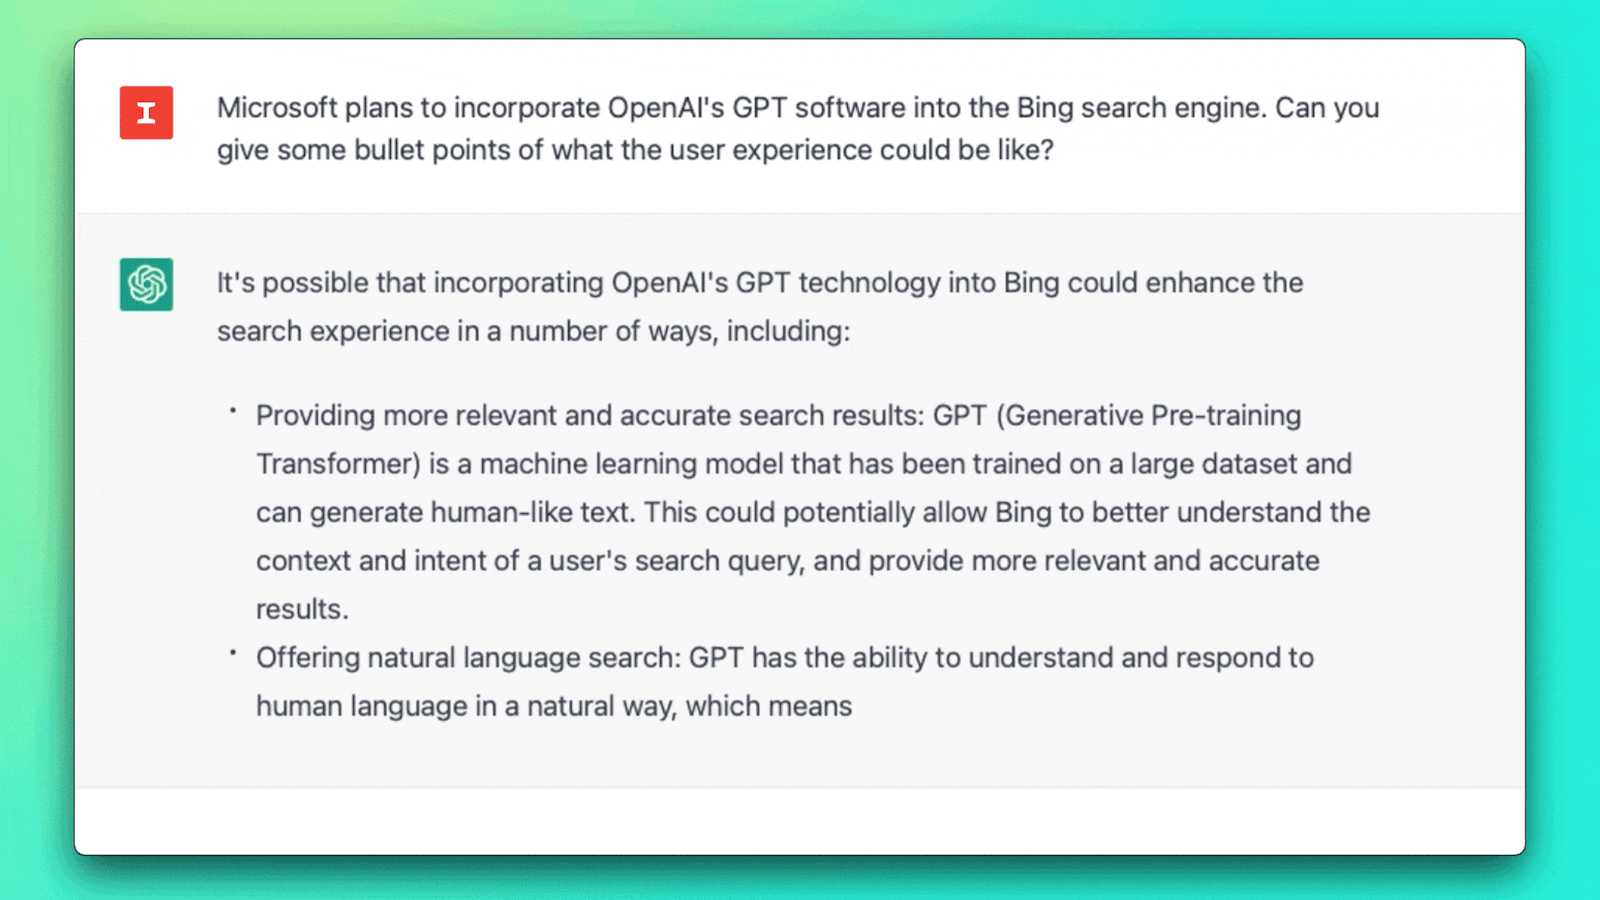 OpenAI's GPT software into Bing Search Engine